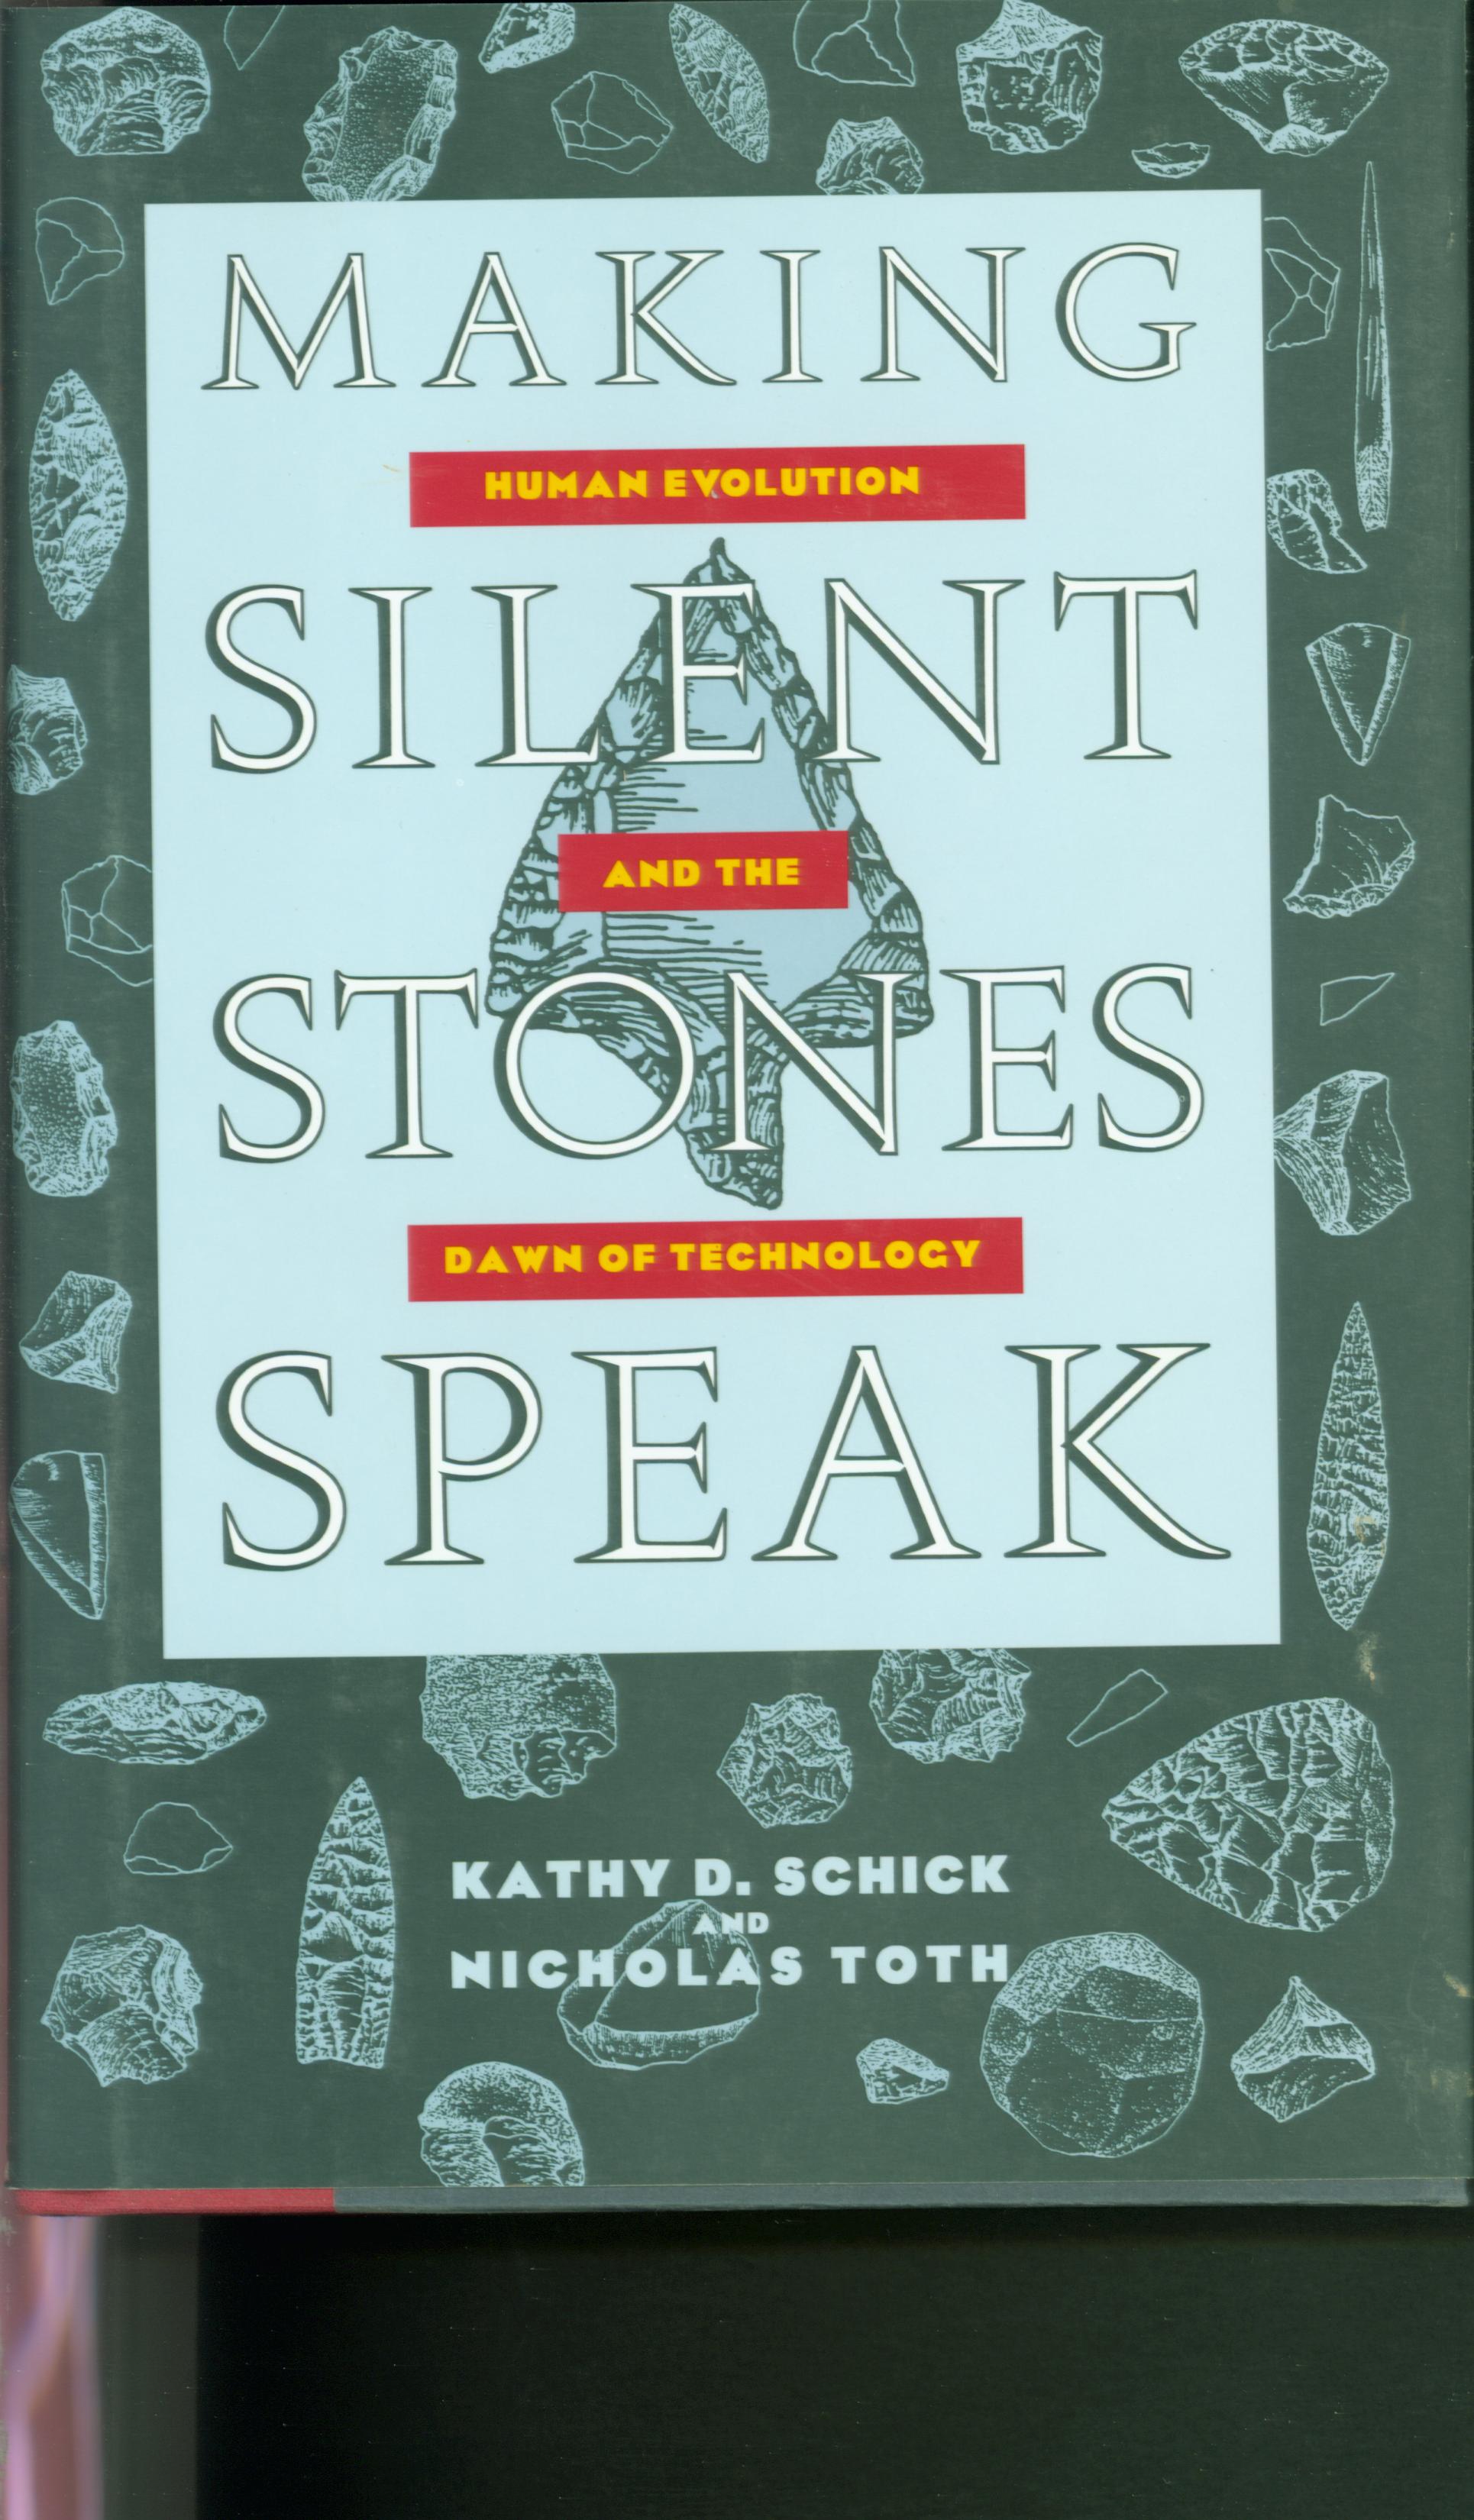 MAKING SILENT STONES SPEAK: human evolution and the dawn of technology--cloth.